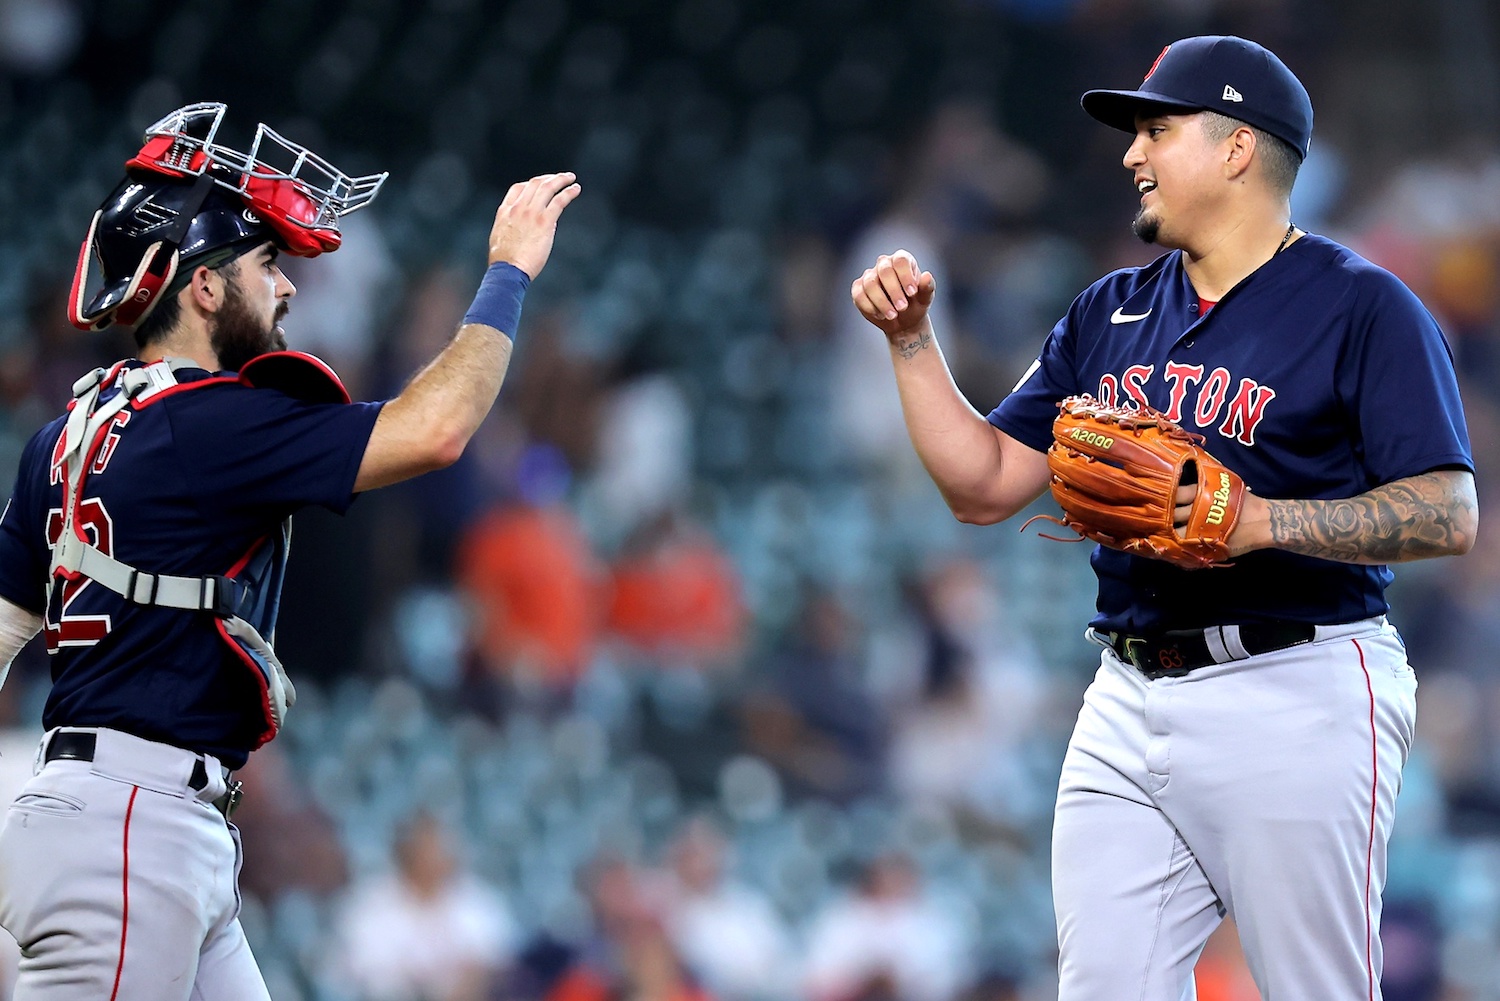 Aug 24, 2023; Houston, Texas, USA; Boston Red Sox catcher Connor Wong (12) congratulates Boston Red Sox relief pitcher Mauricio Llovera (68) following the final out against the Houston Astros during the ninth inning at Minute Maid Park. Mandatory Credit: Erik Williams-USA TODAY Sports